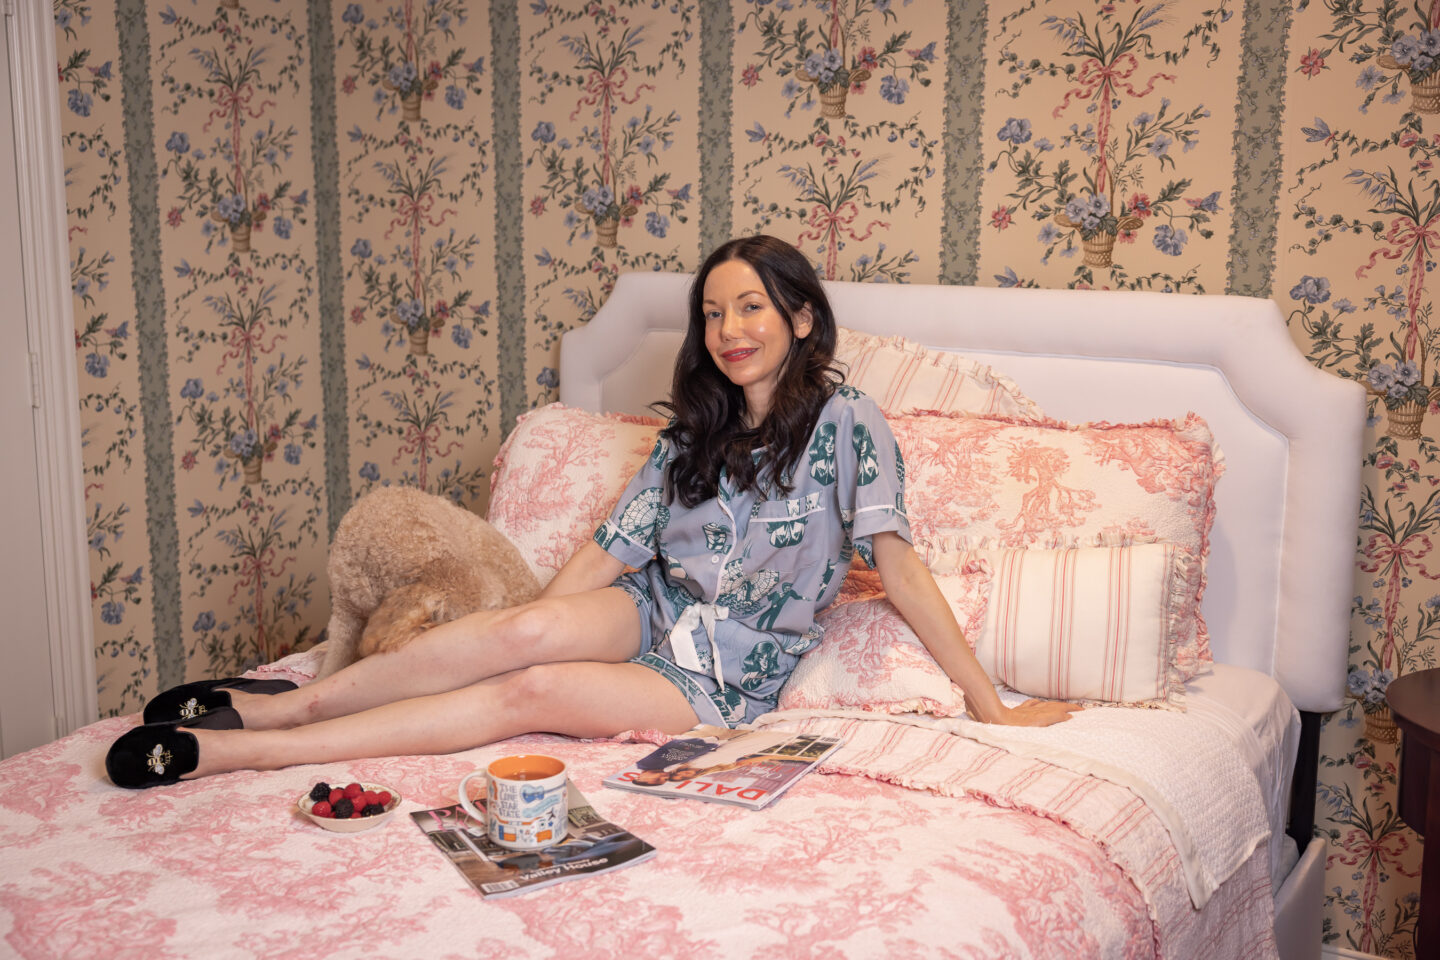 Dallas Lifestyle Blogger, Home Interiors, Guest Bedroom, Traditional Home Decor, Cottage Core, Grandmillennial Style, Floral Wallpaper, LoveShackFancy, Luxury Home, Katie Kime Pajamas, Toile Bedding, Patricia Green Slippers